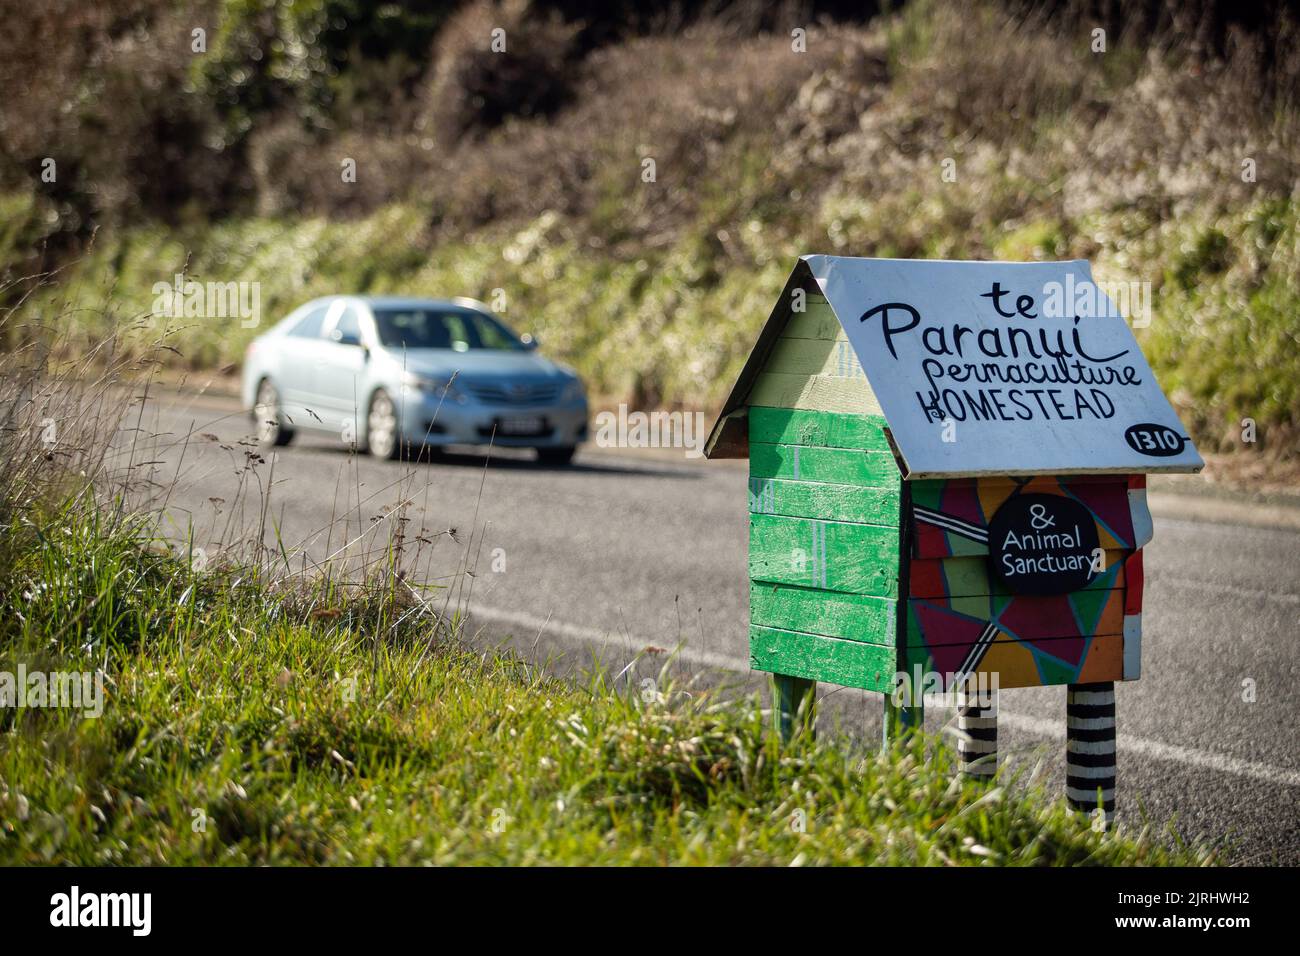 Te Paranui , a permaculture community near Picton, New Zealand Stock Photo